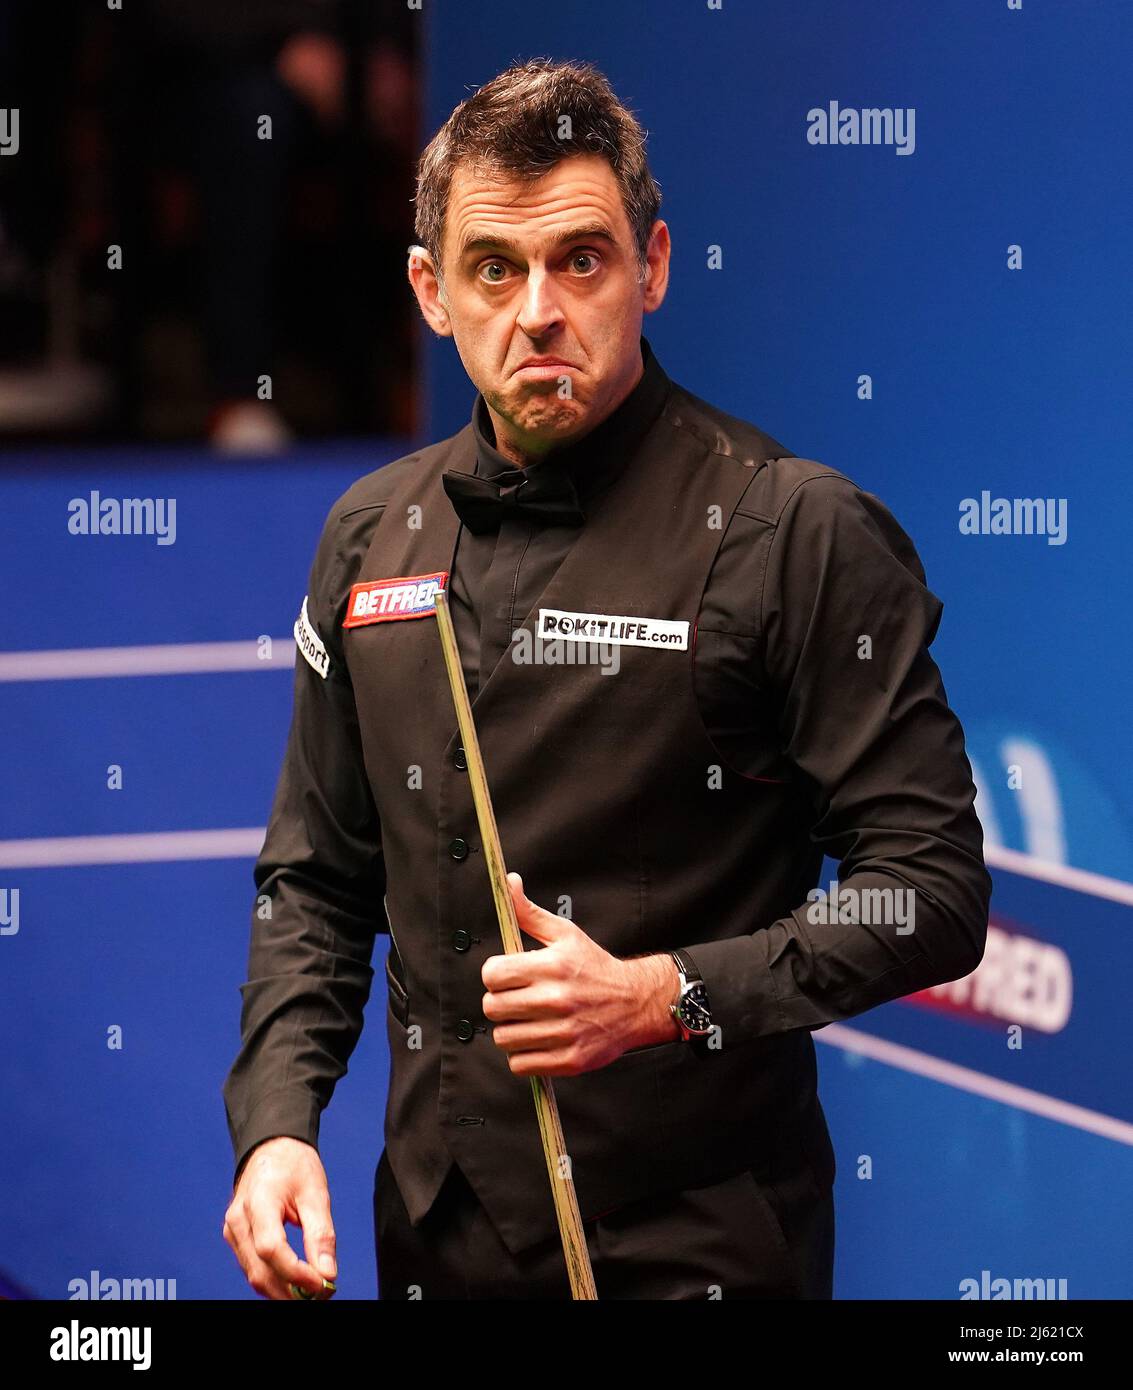 Ronnie OSullivan reacts after a shot against Stephen Maguire, during day twelve of the Betfred World Snooker Championship at The Crucible, Sheffield